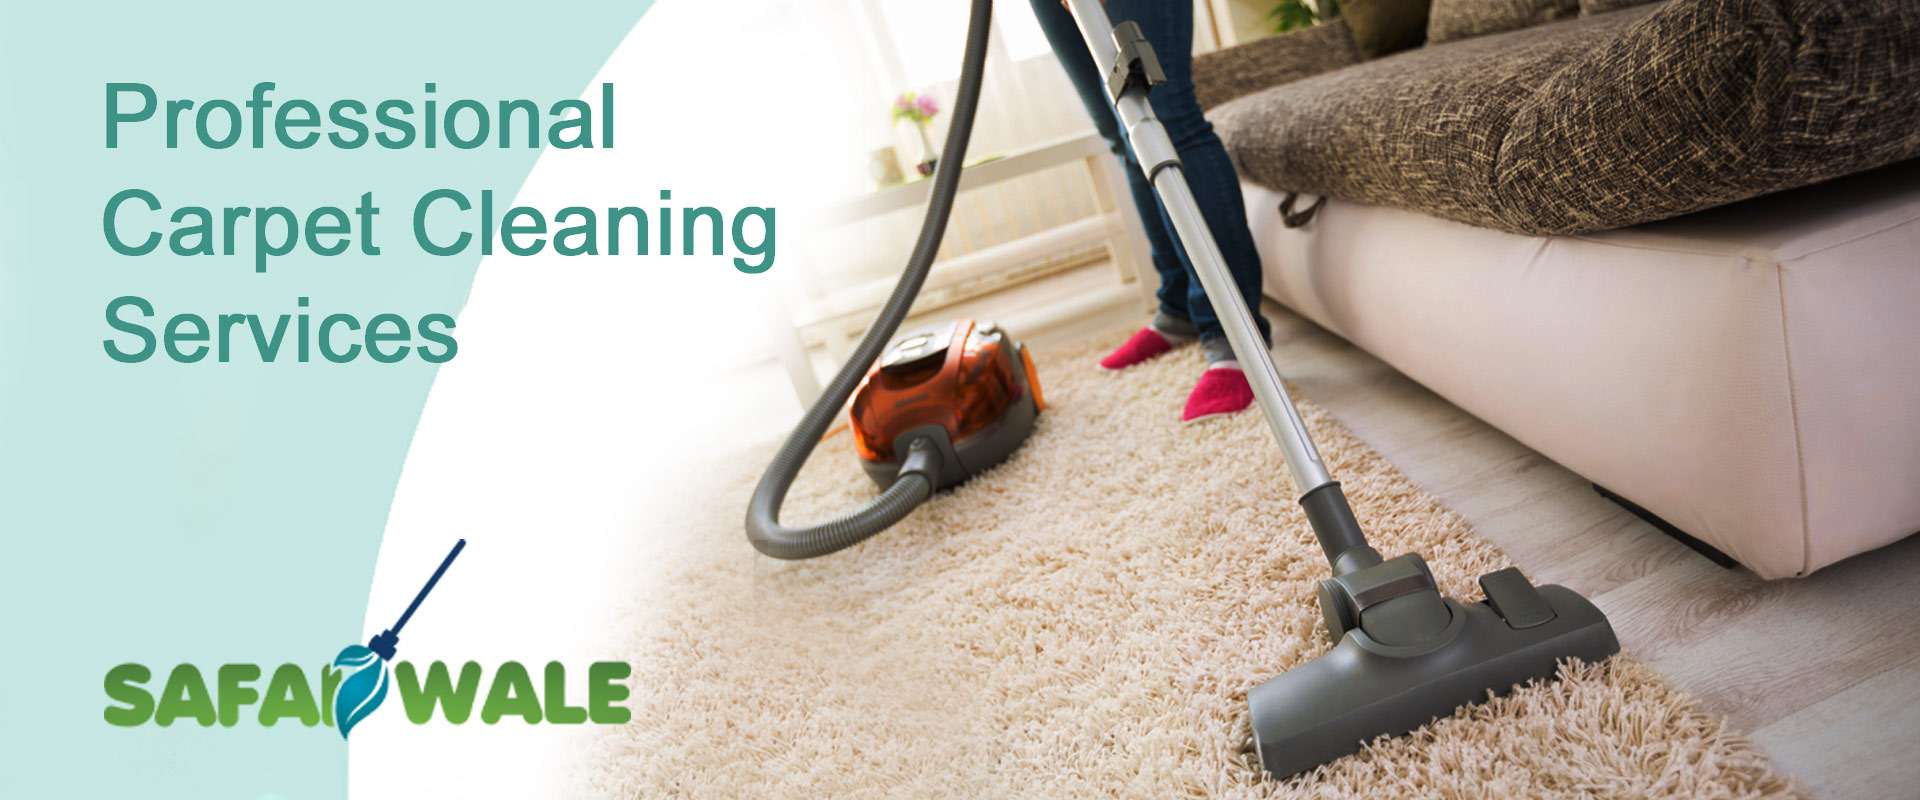 Carpet Cleaning Services In Dombivli, Thane